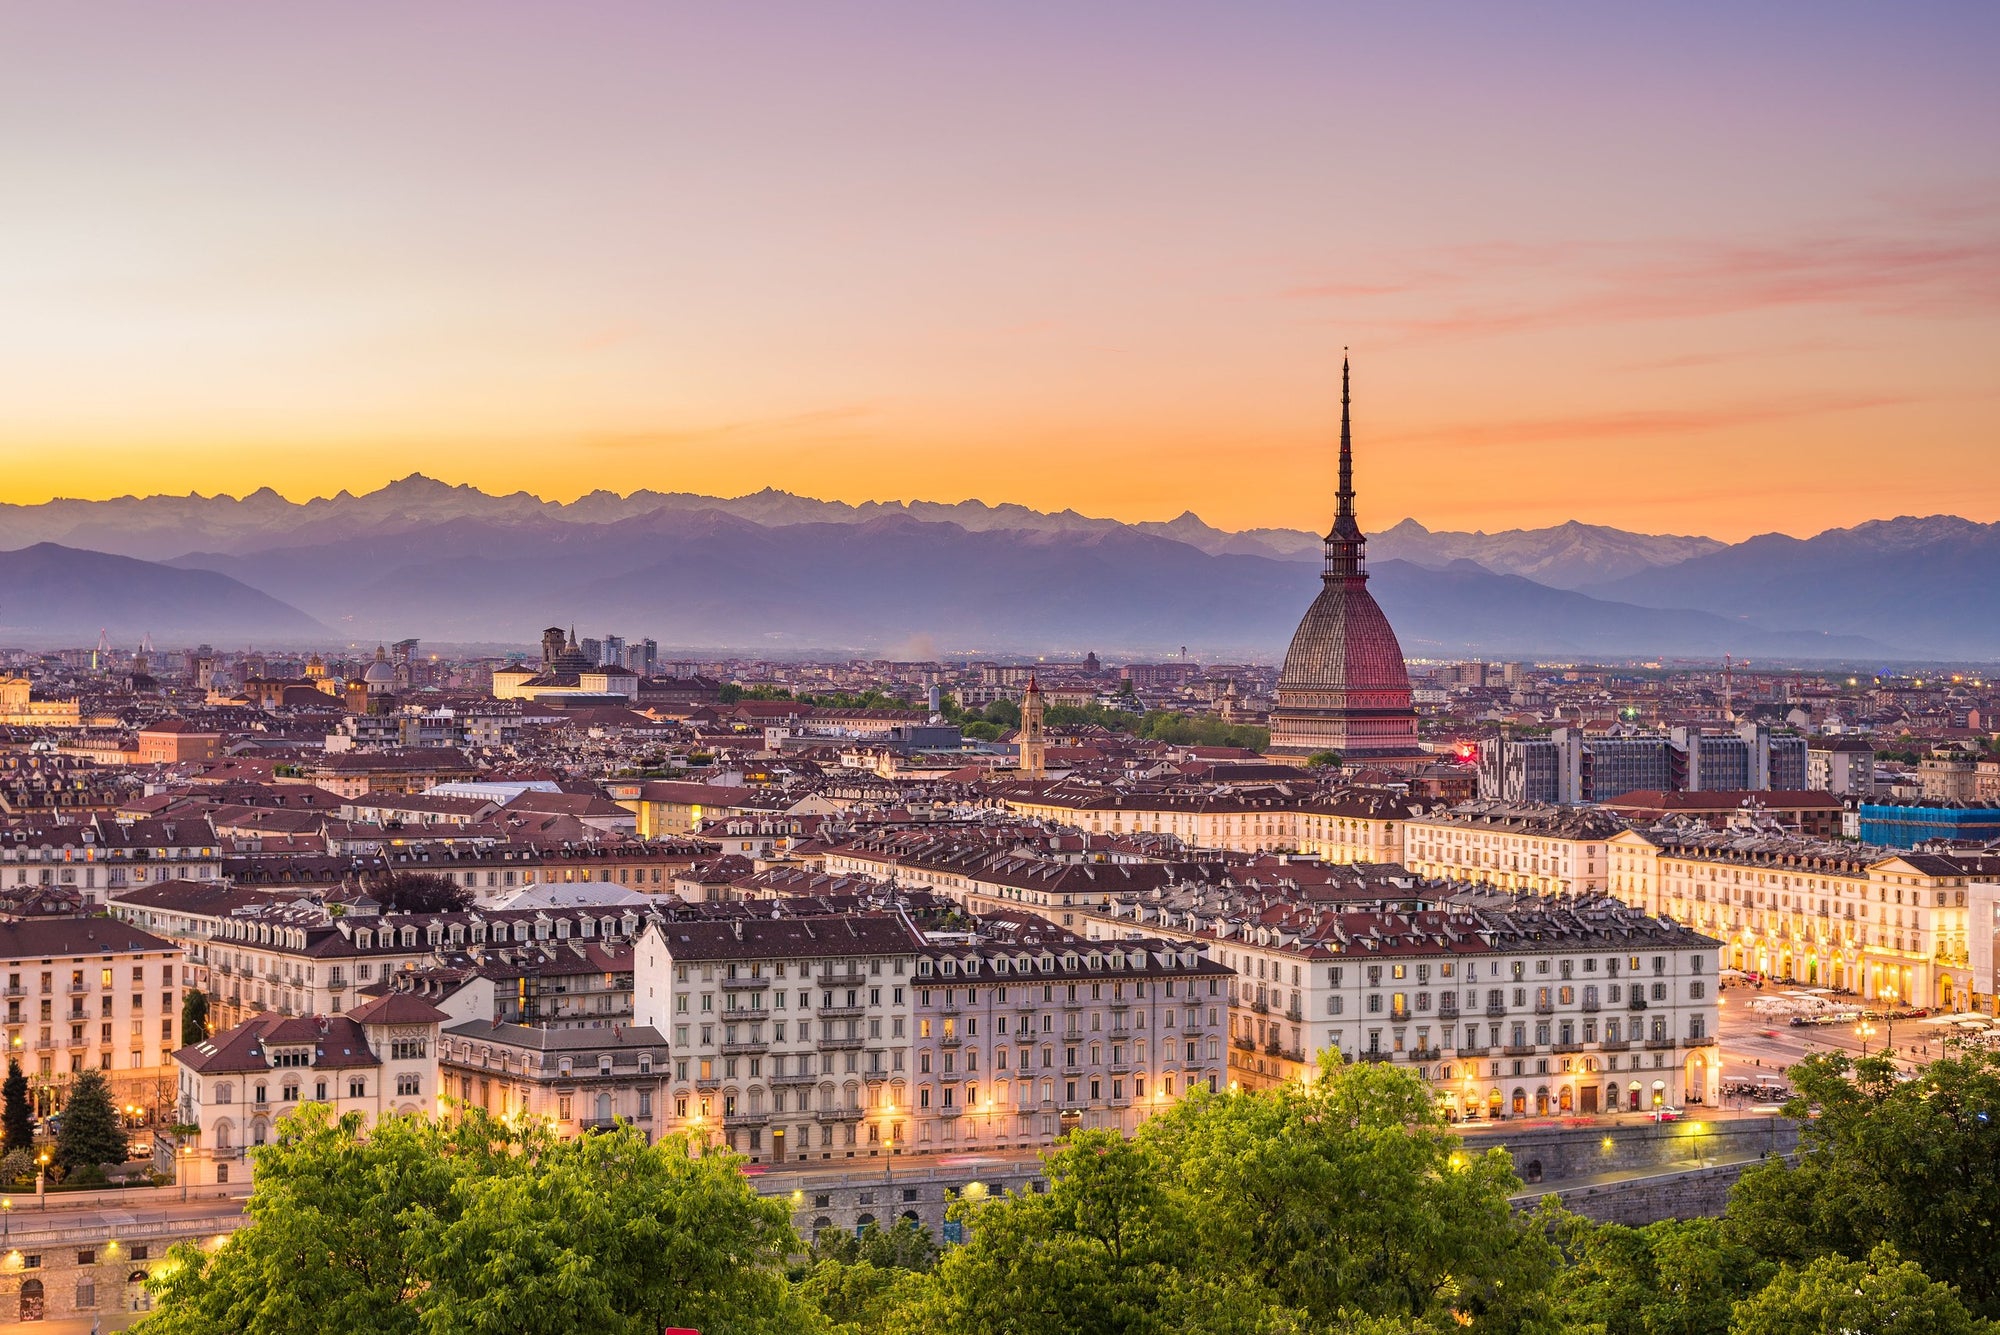 GUIDE TO TURIN, ITALY